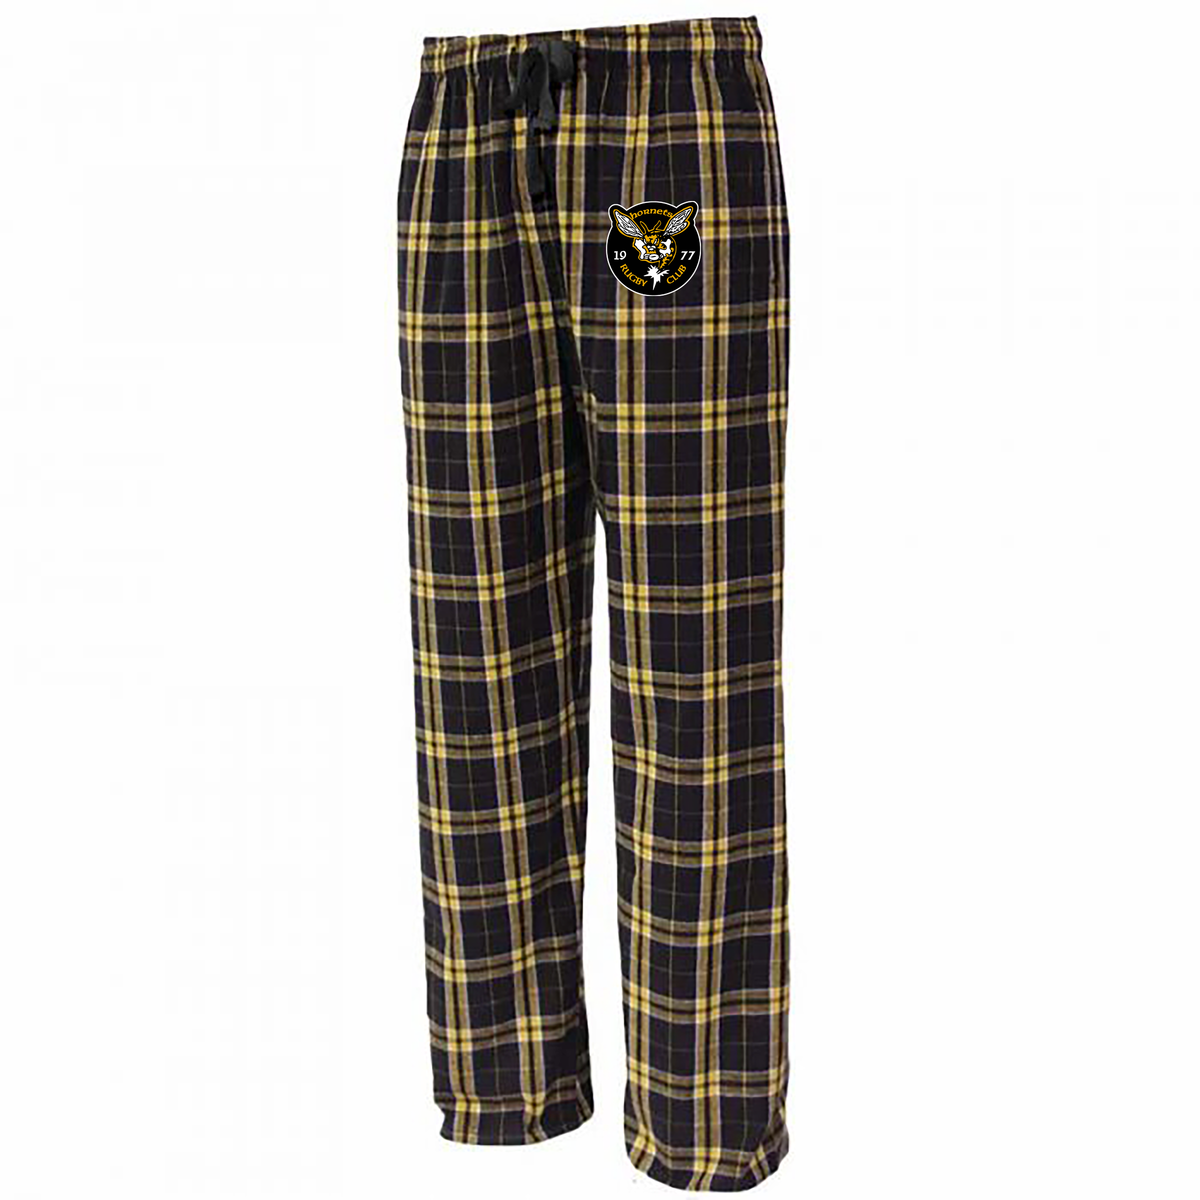 St. Louis Hornets Rugby Club Flannel Pajama Pants